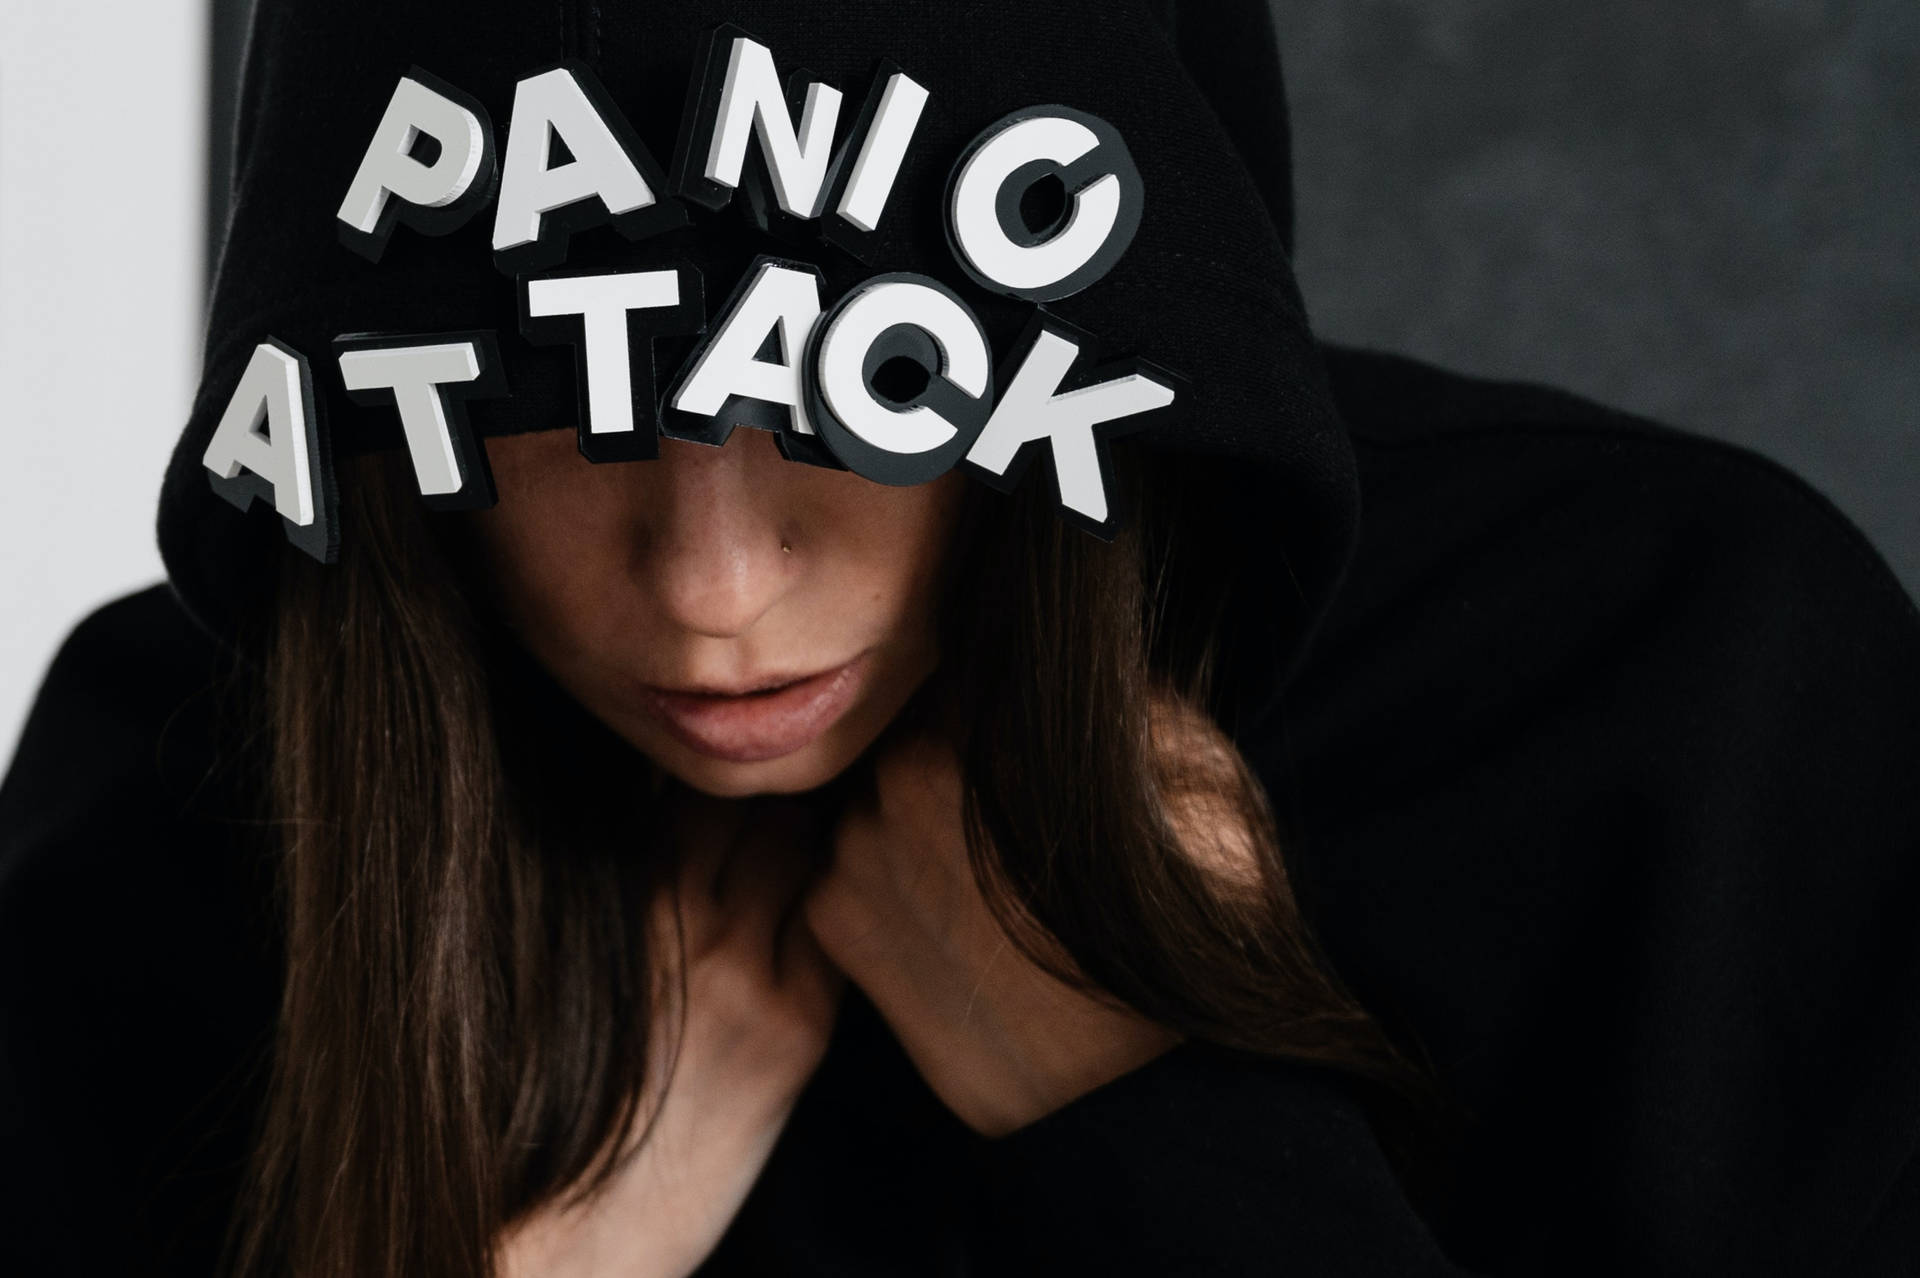 Woman In Panic Attack Hoodie